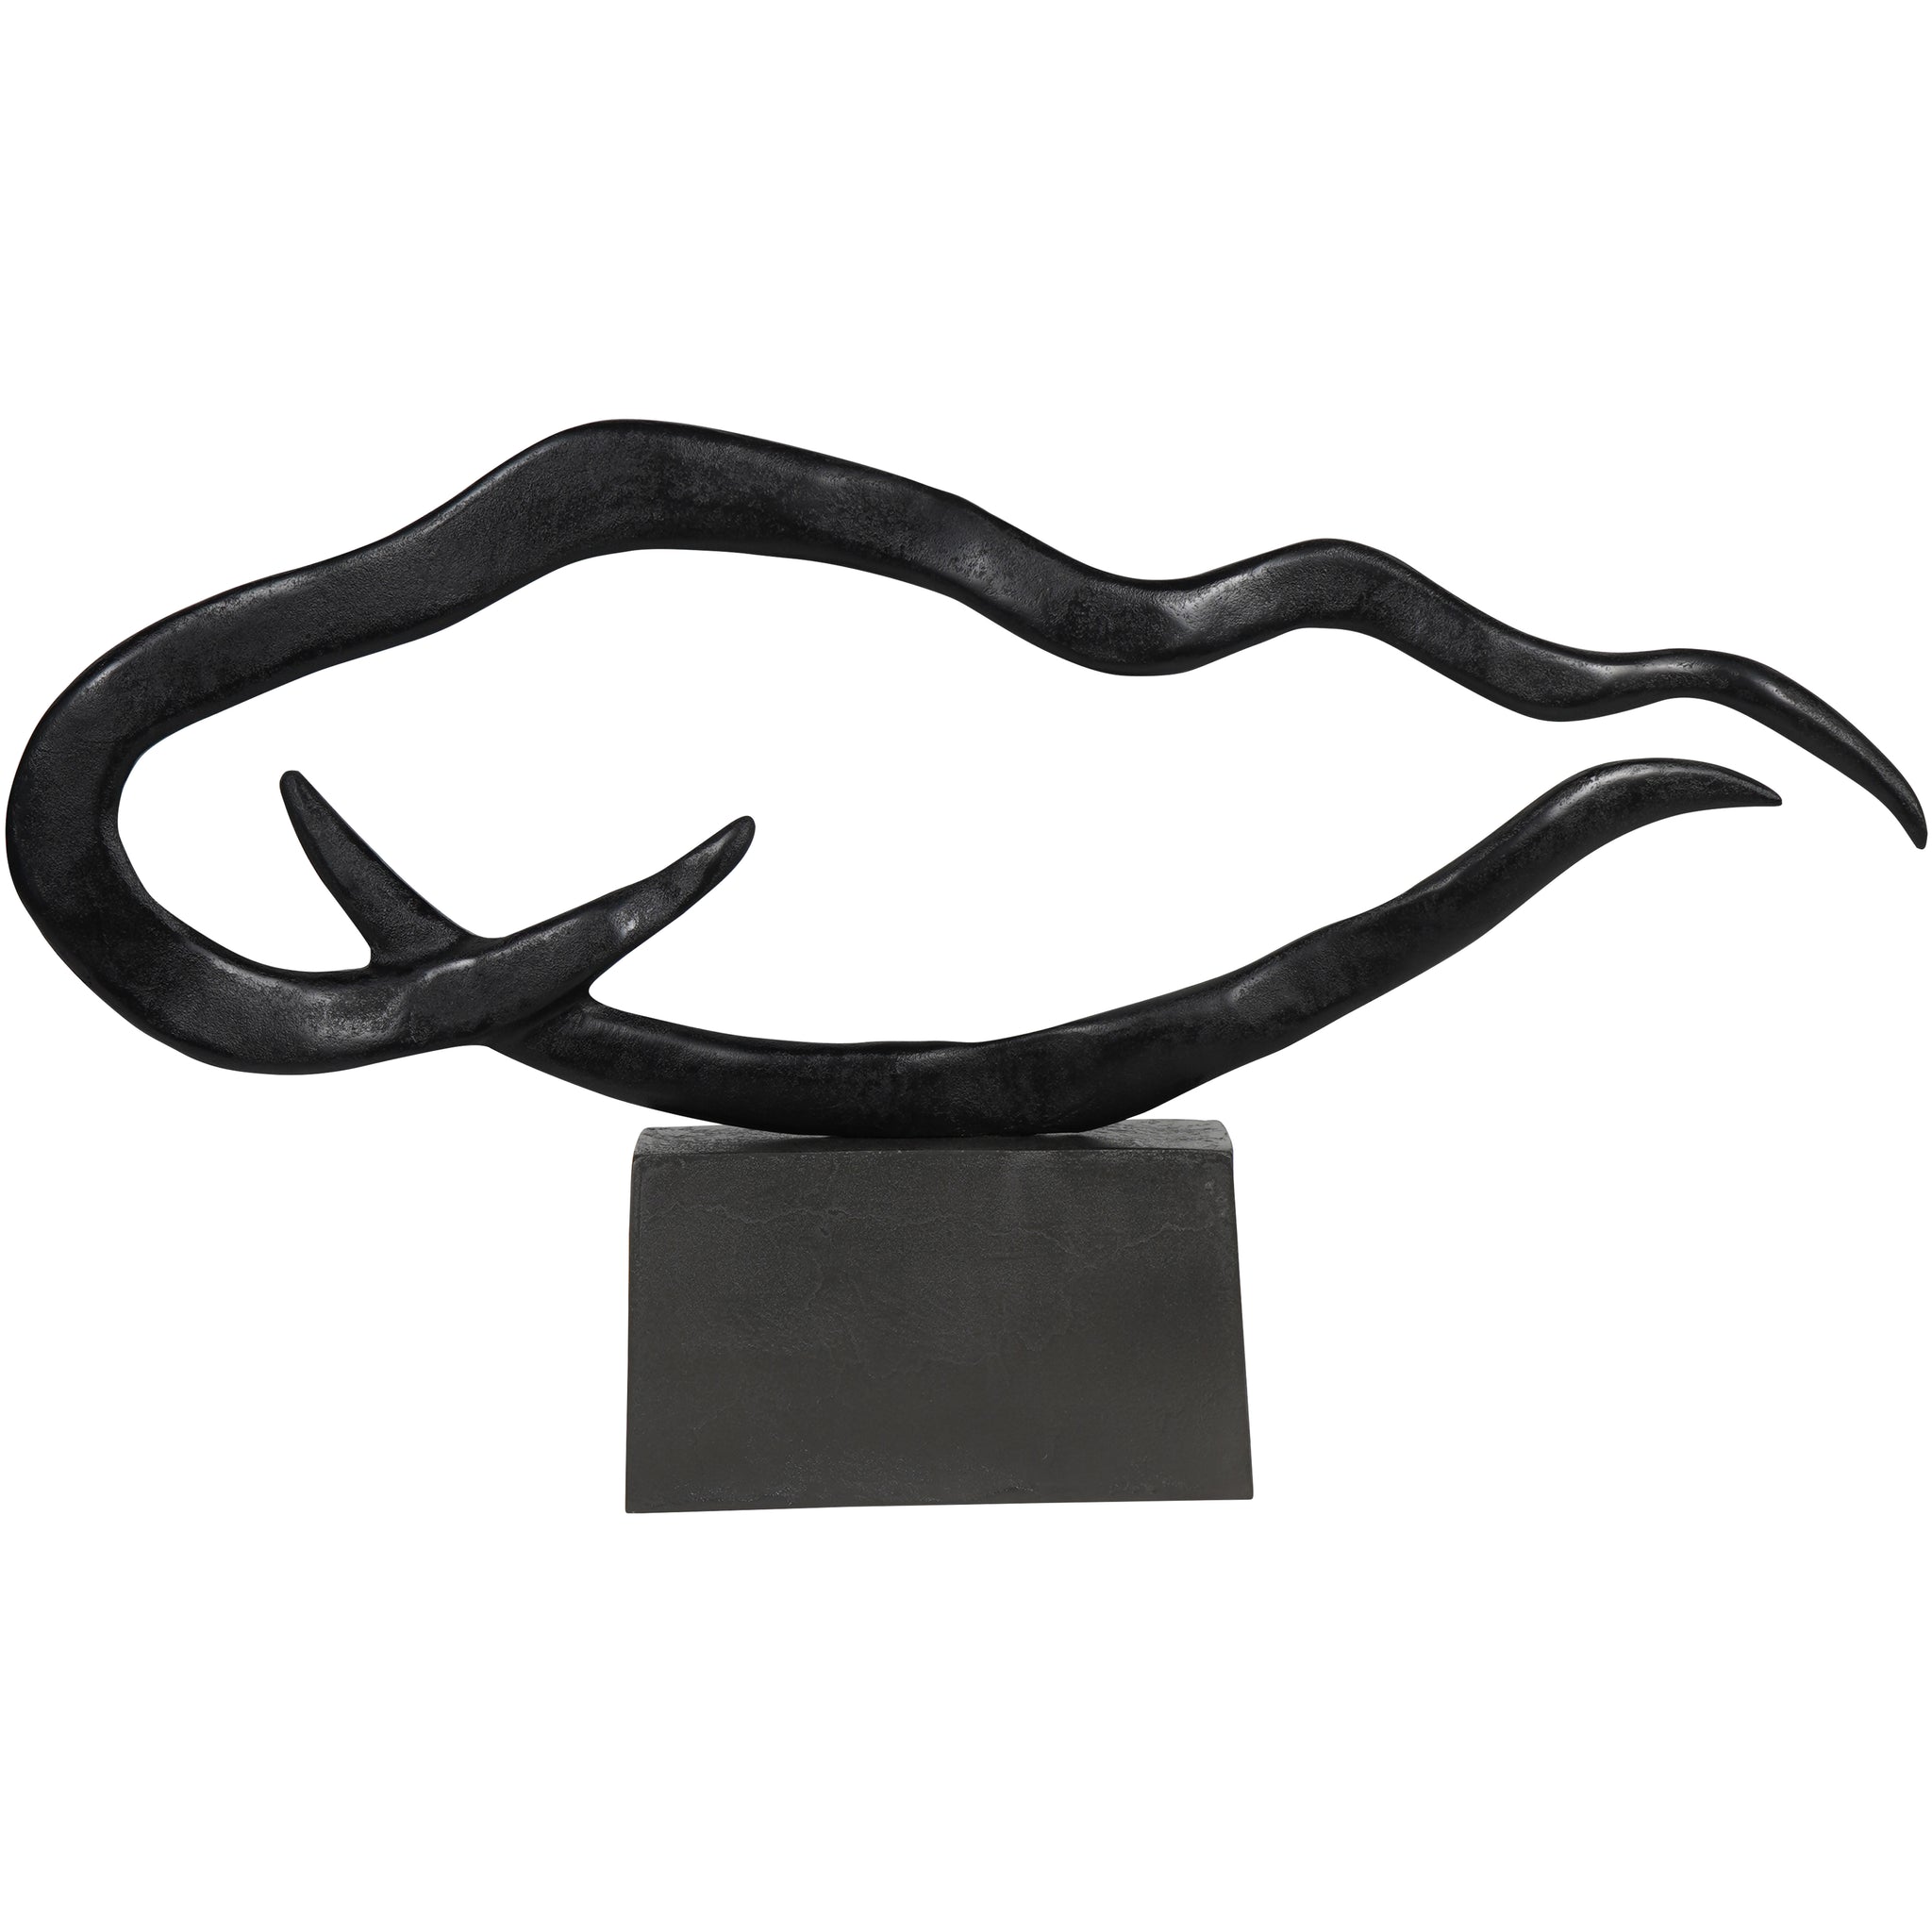 Aisling Large Textured Black Abstract Sculpture